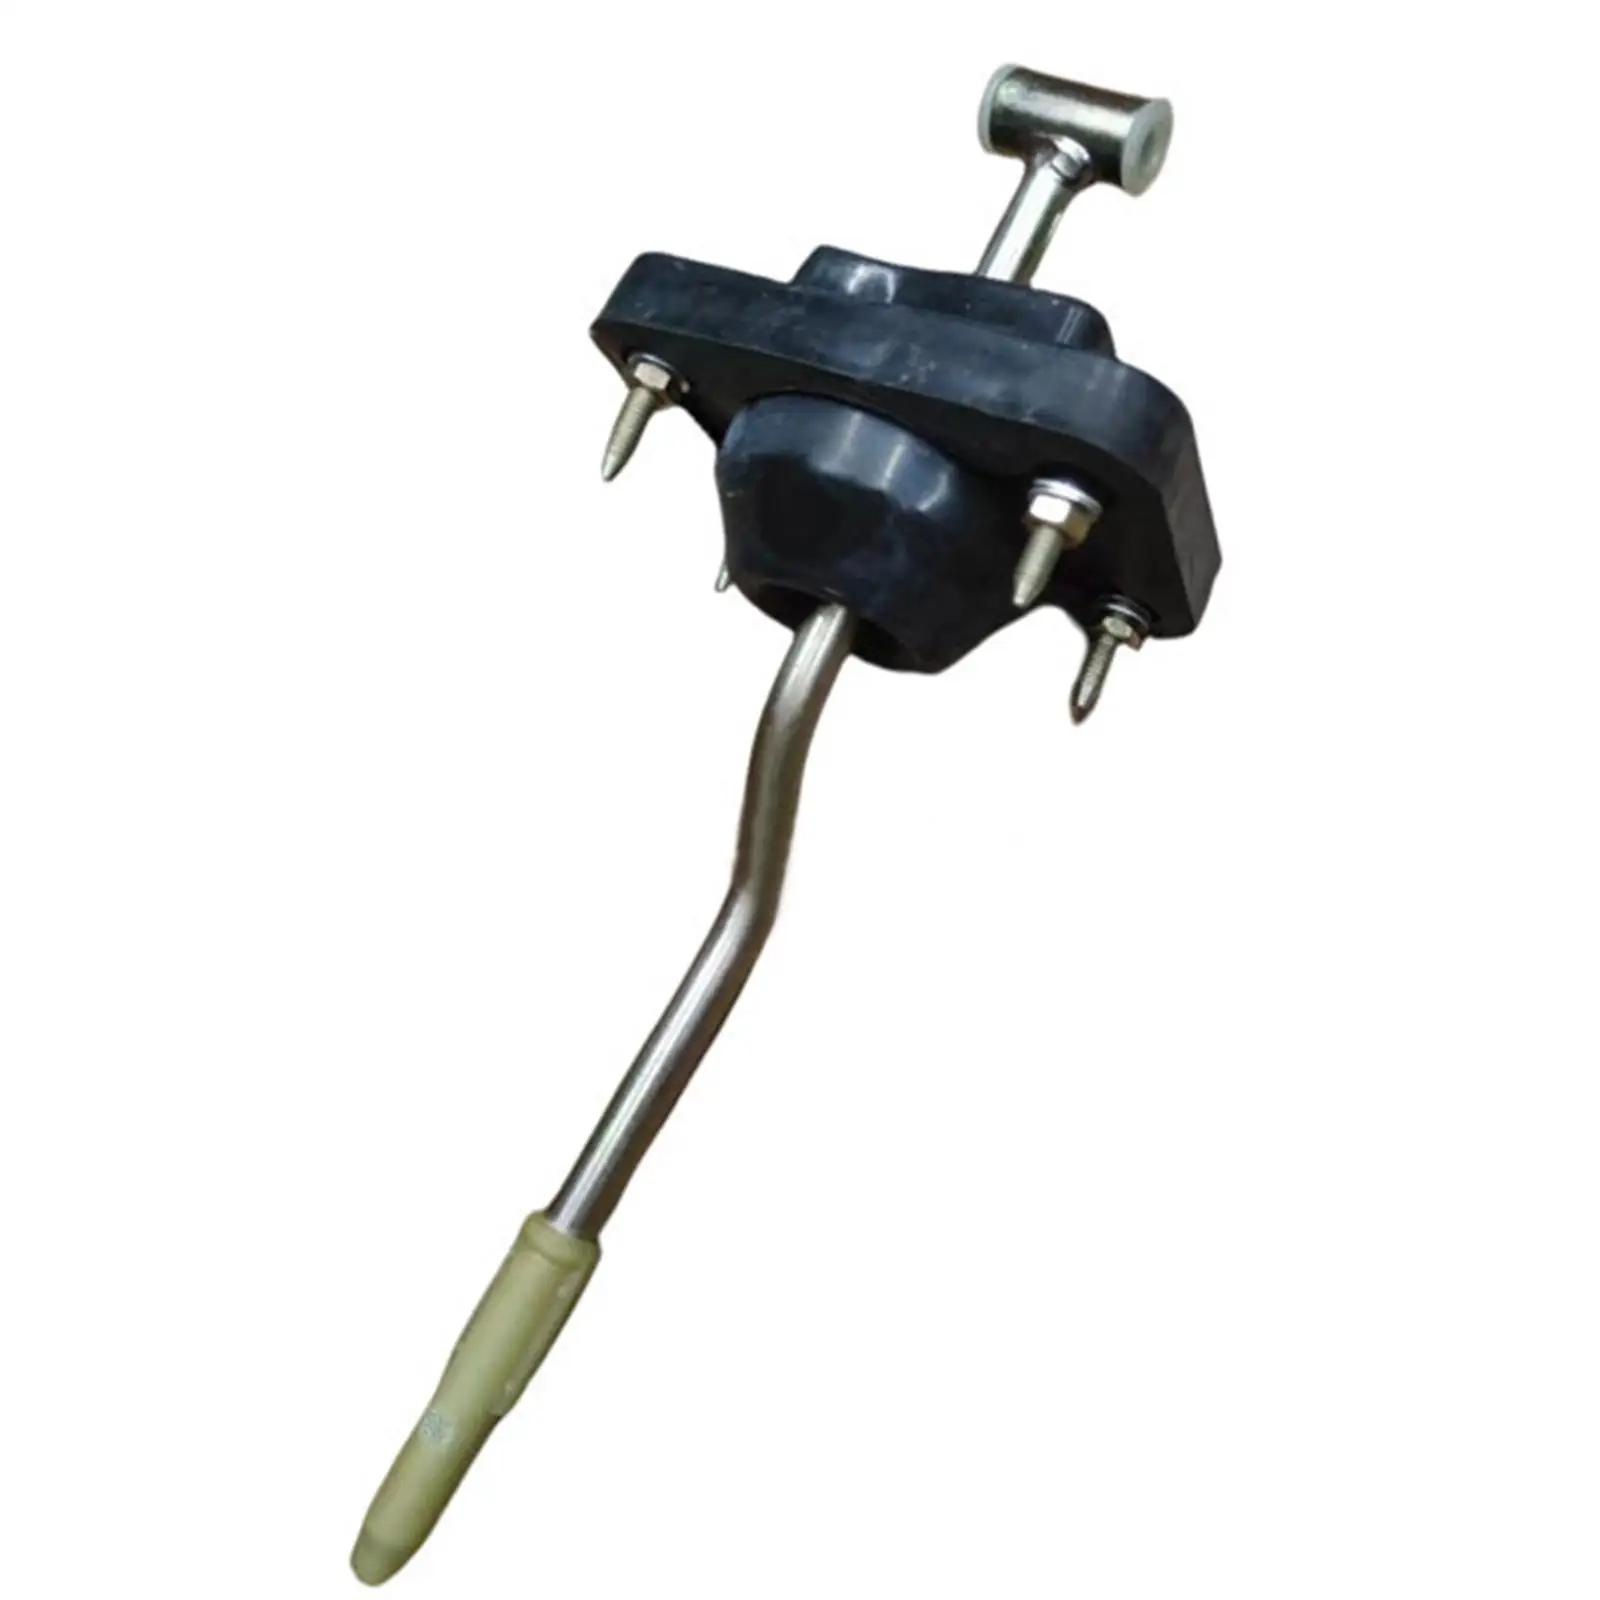 Gear Shift Lever Assembly Auto Accessories 2400H3 for Peugeot 206 207 Easy to Install High Reliability